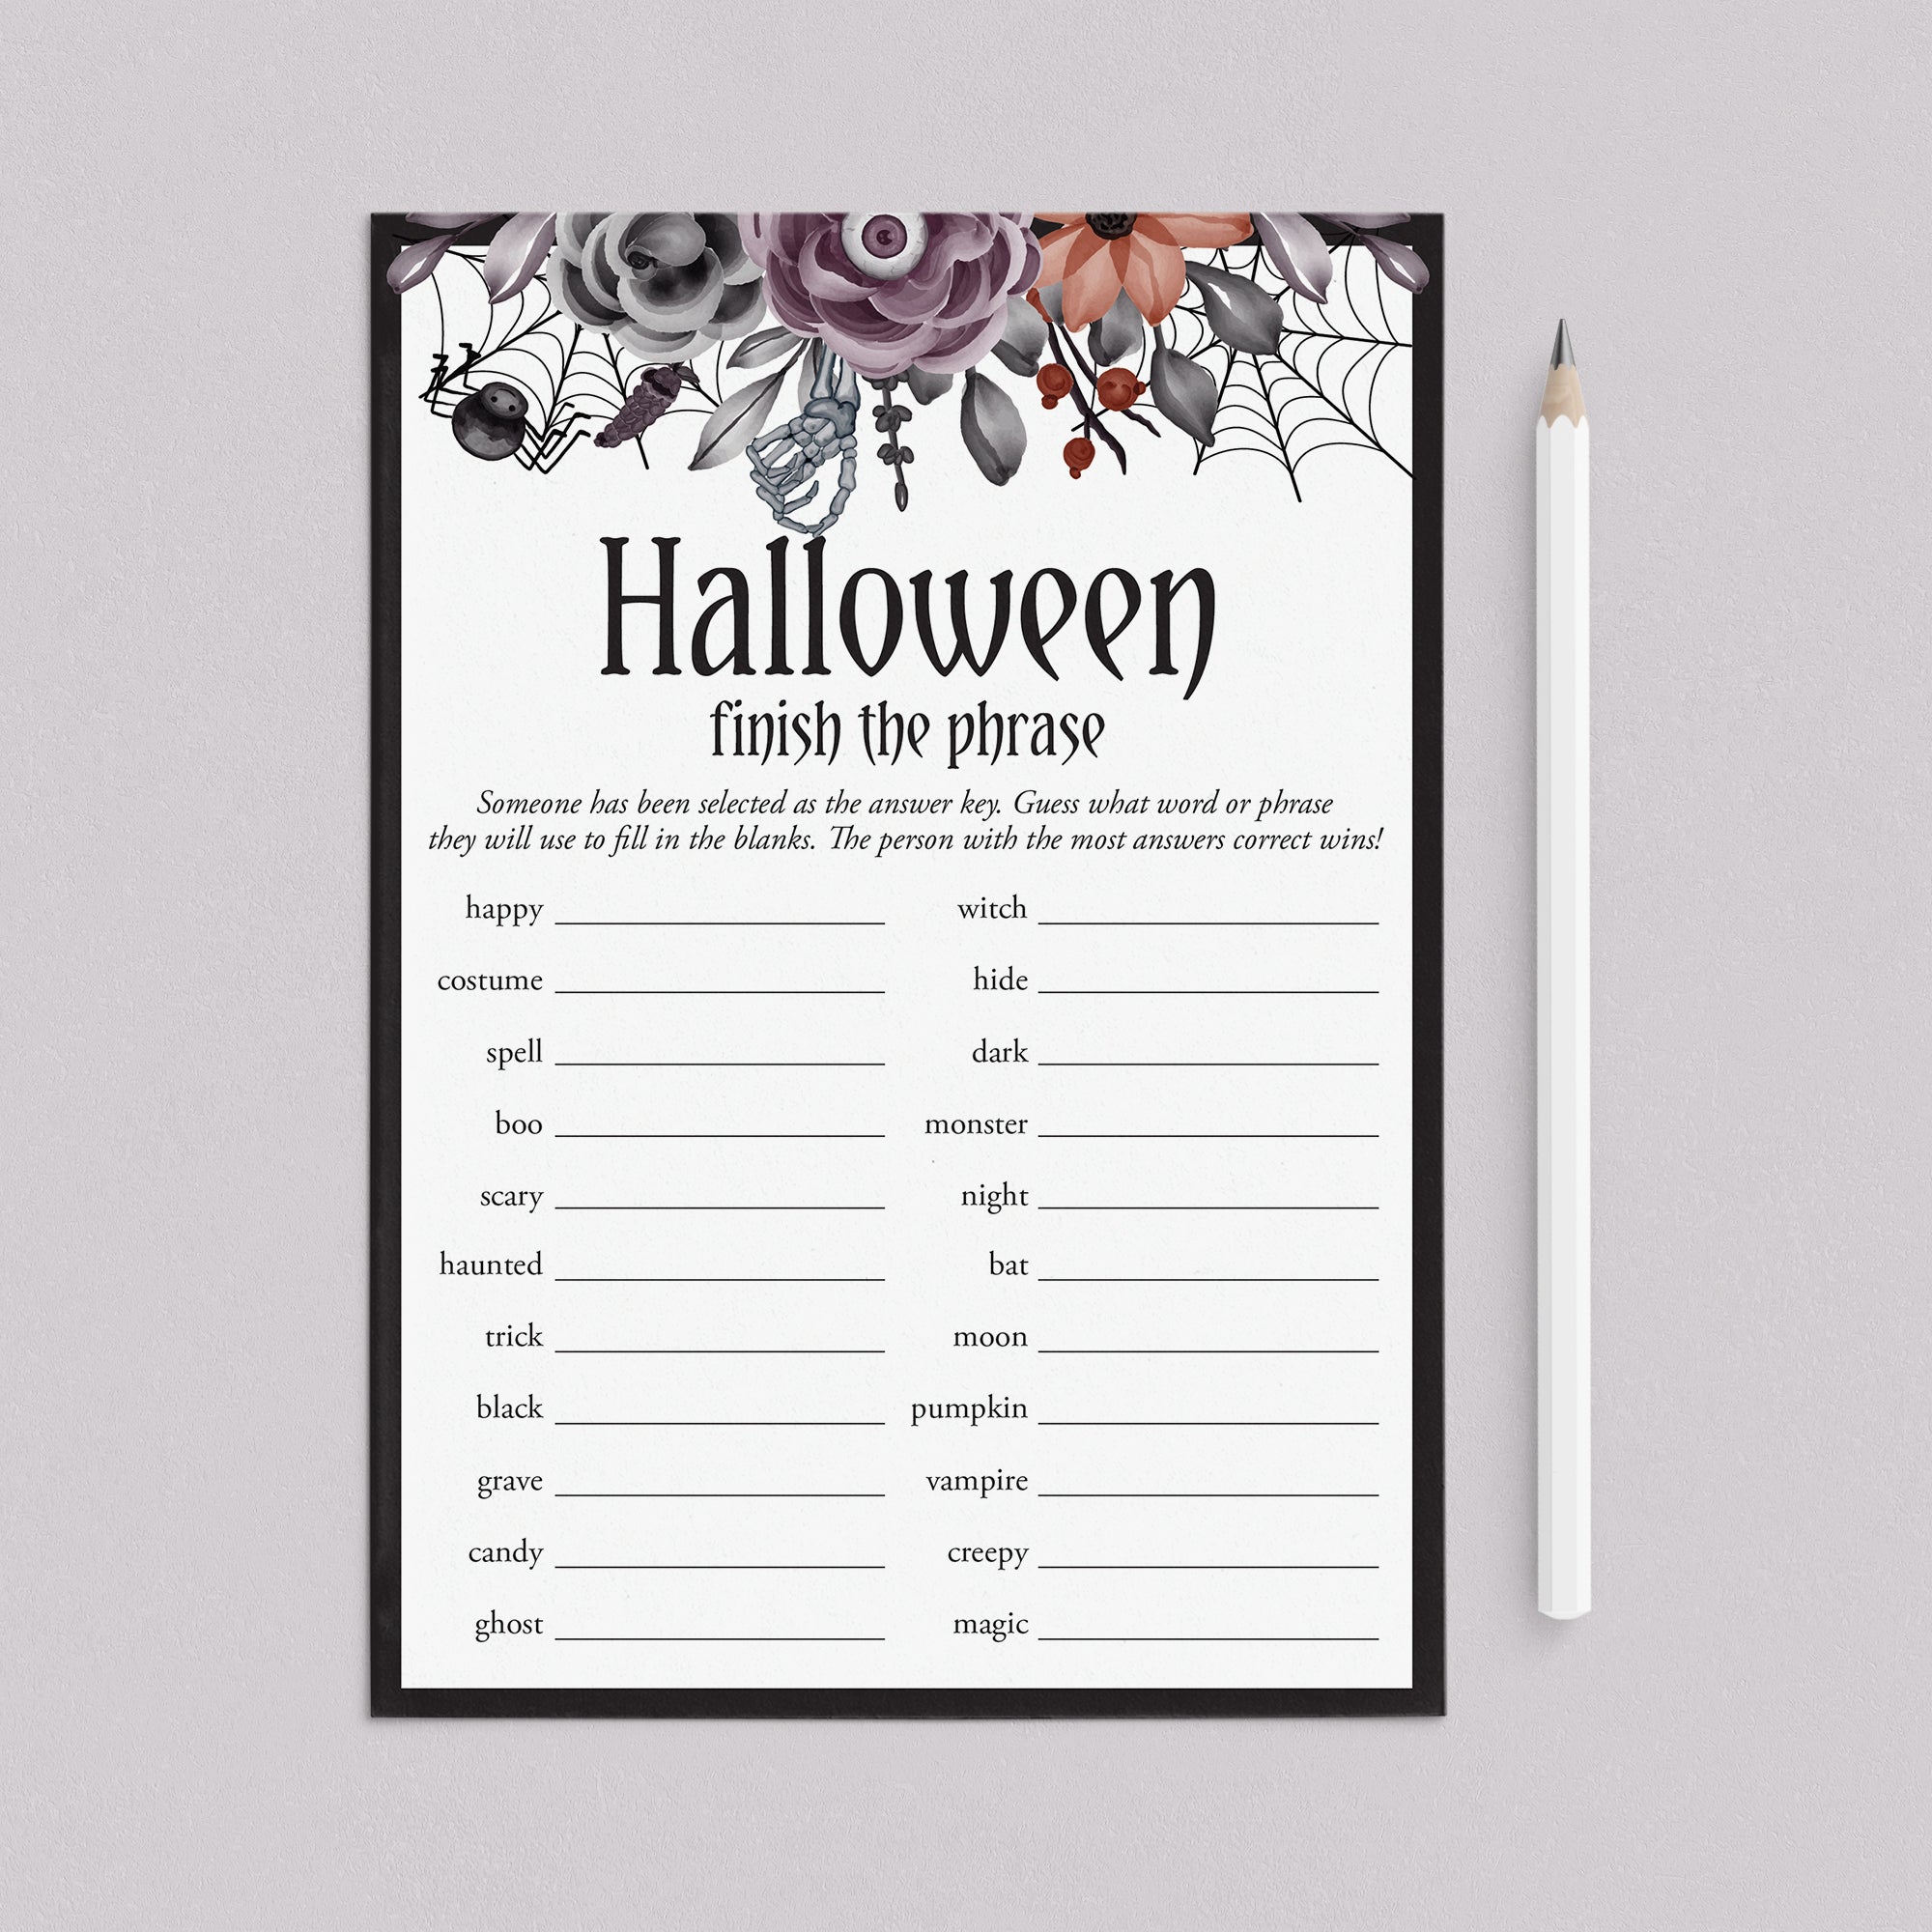 Floral Halloween Ladies Night Game Finish The Phrase by LittleSizzle